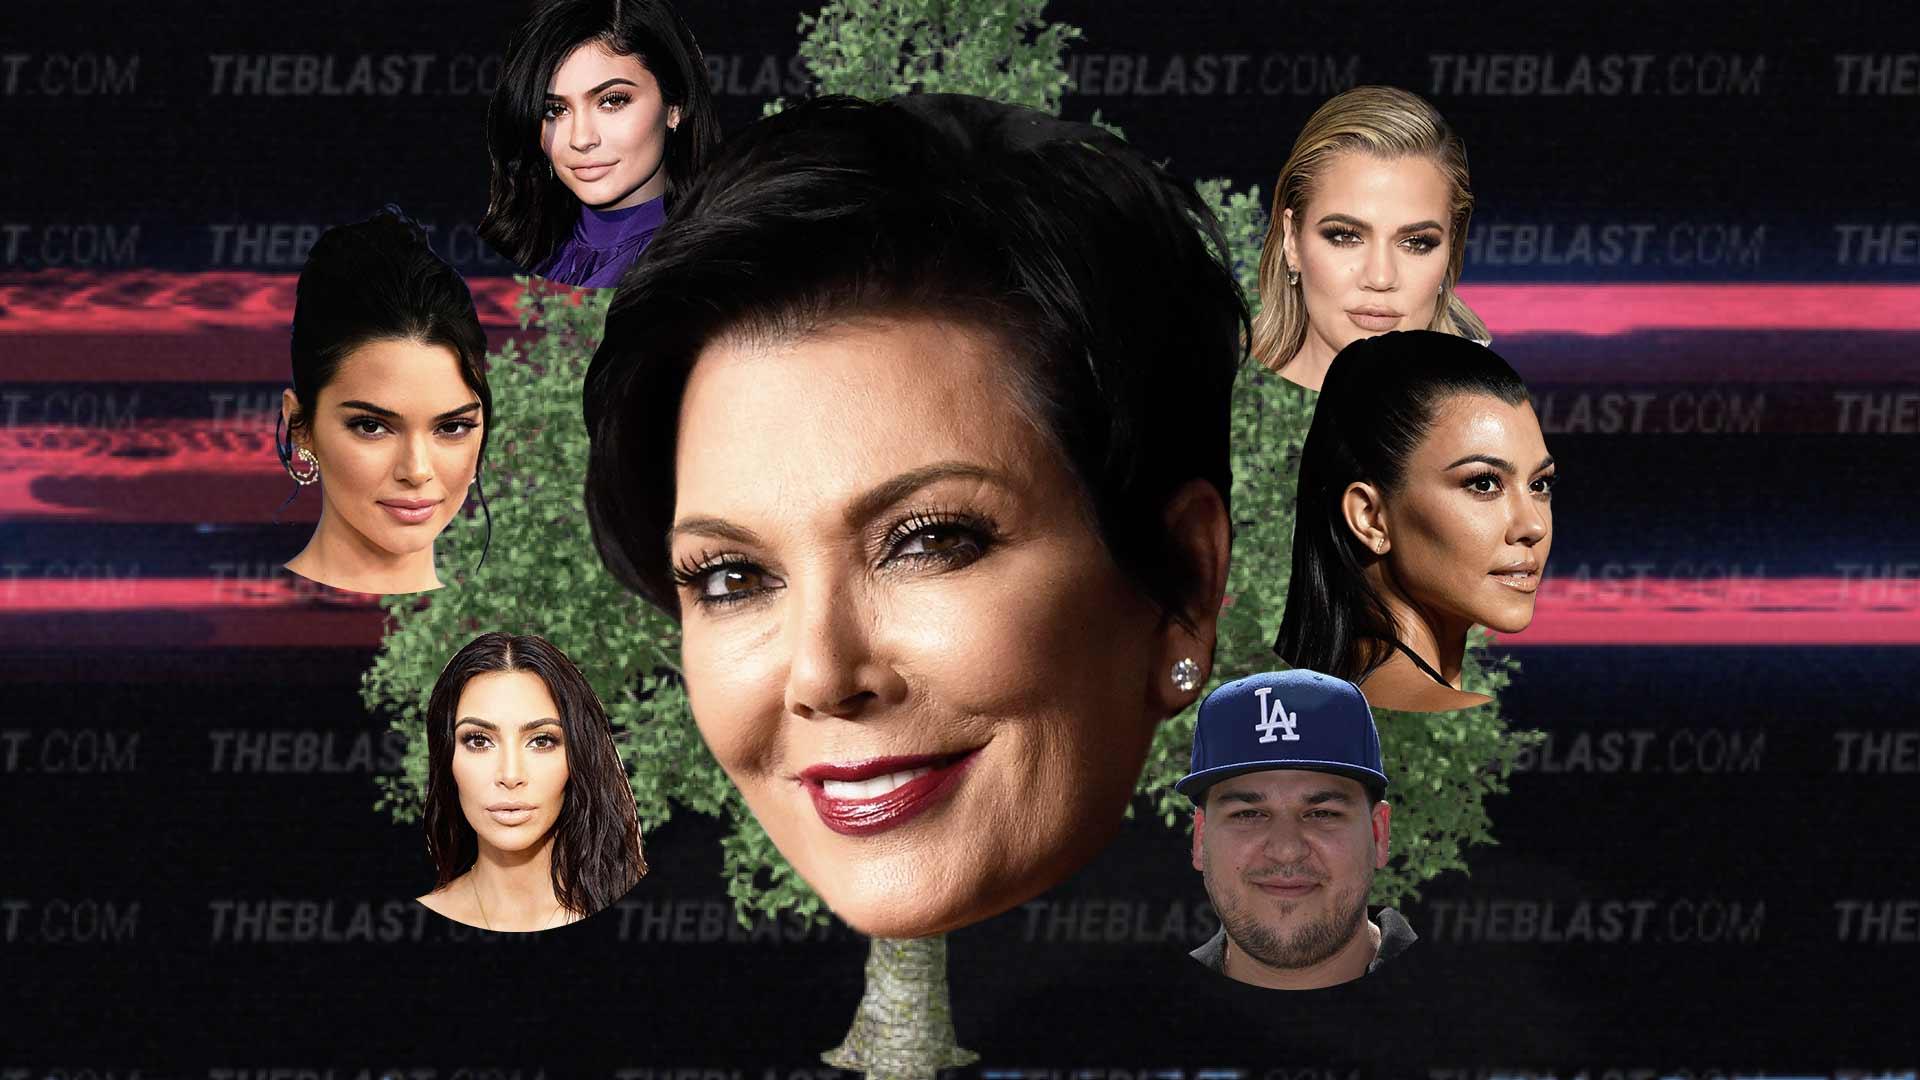 Sorting Out the KarJenner Family Tree Now That Kim & Kanye’s Baby Has Arrived